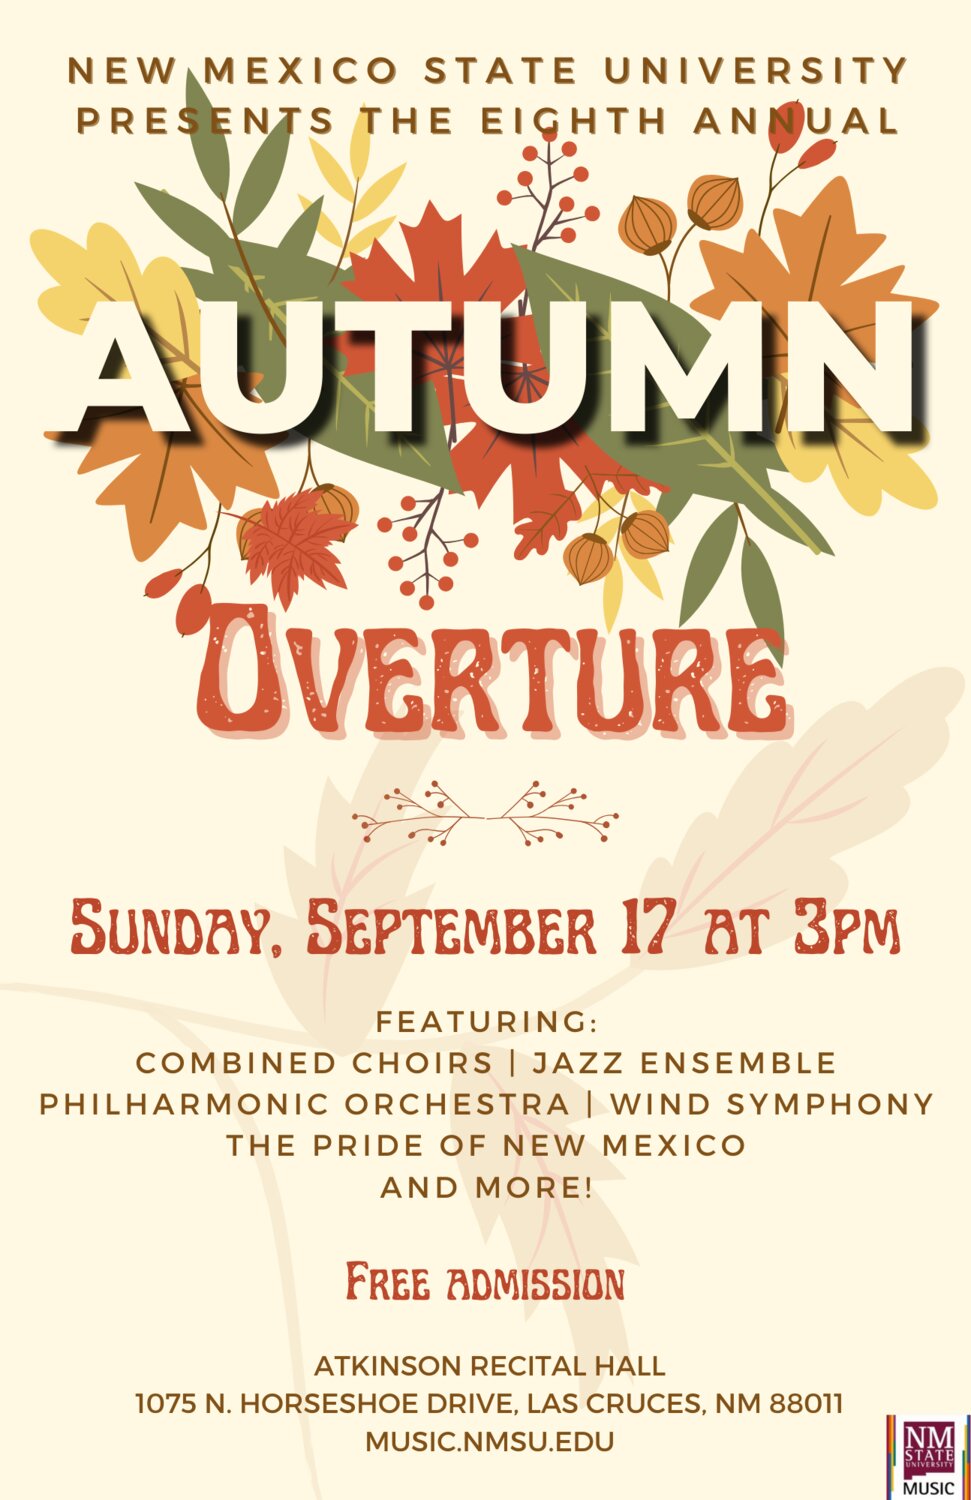 NMSU orchestras, bands, choirs, mariachi, dancers, piano studio unite for a Sunday, Sept. 17, concert on campus.